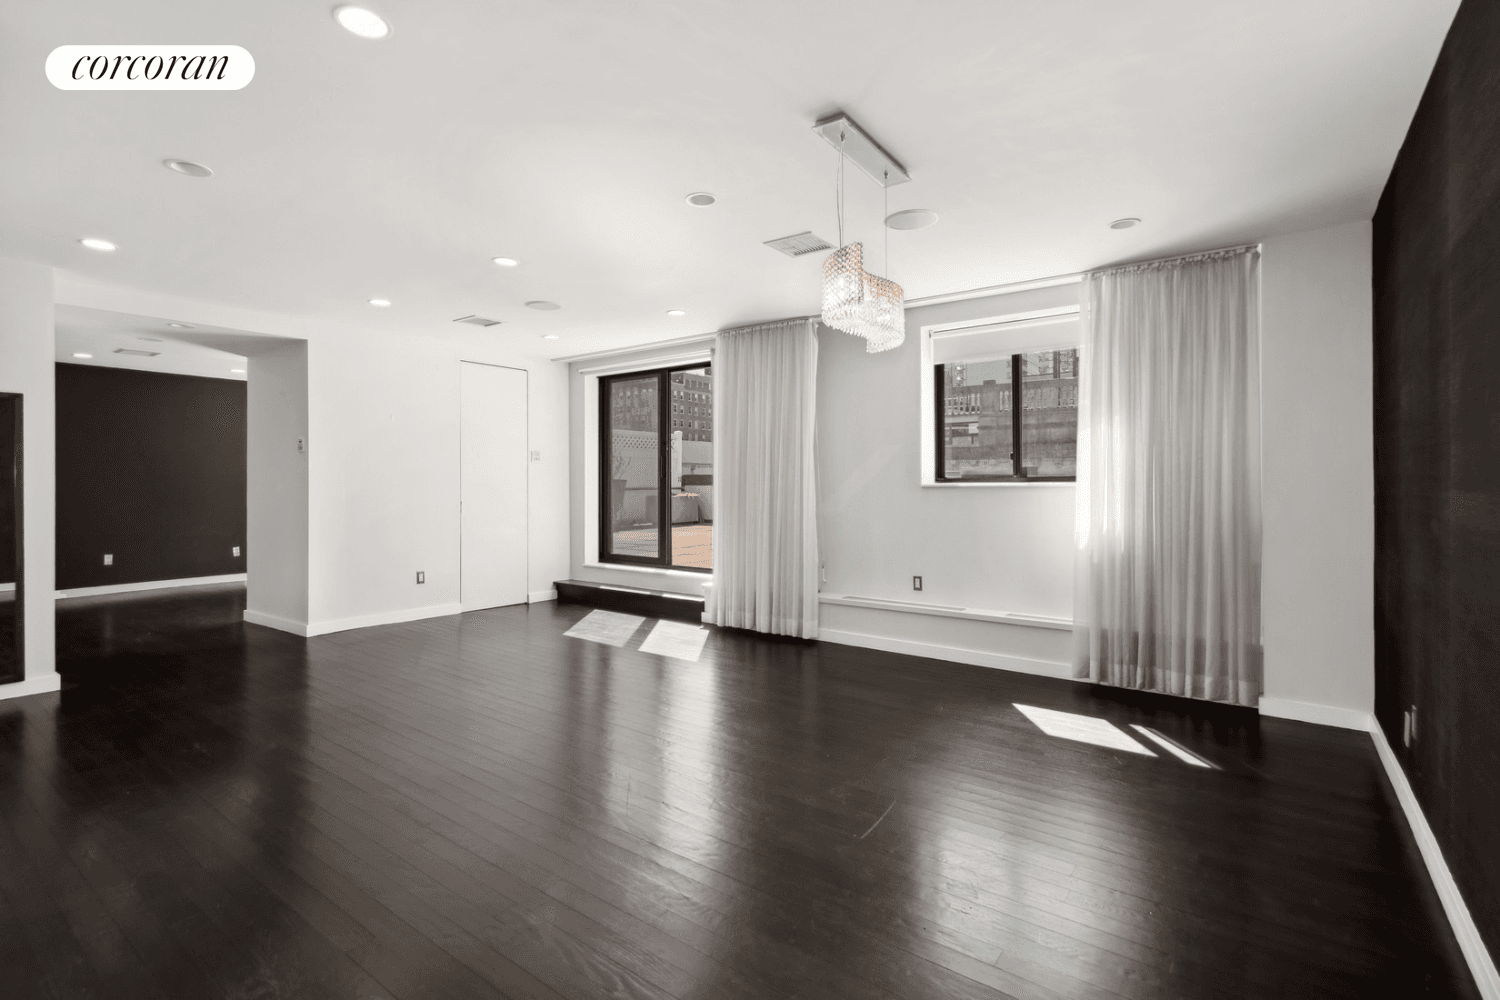 Welcome to your new home with breathtaking views of the iconic Empire State Building !